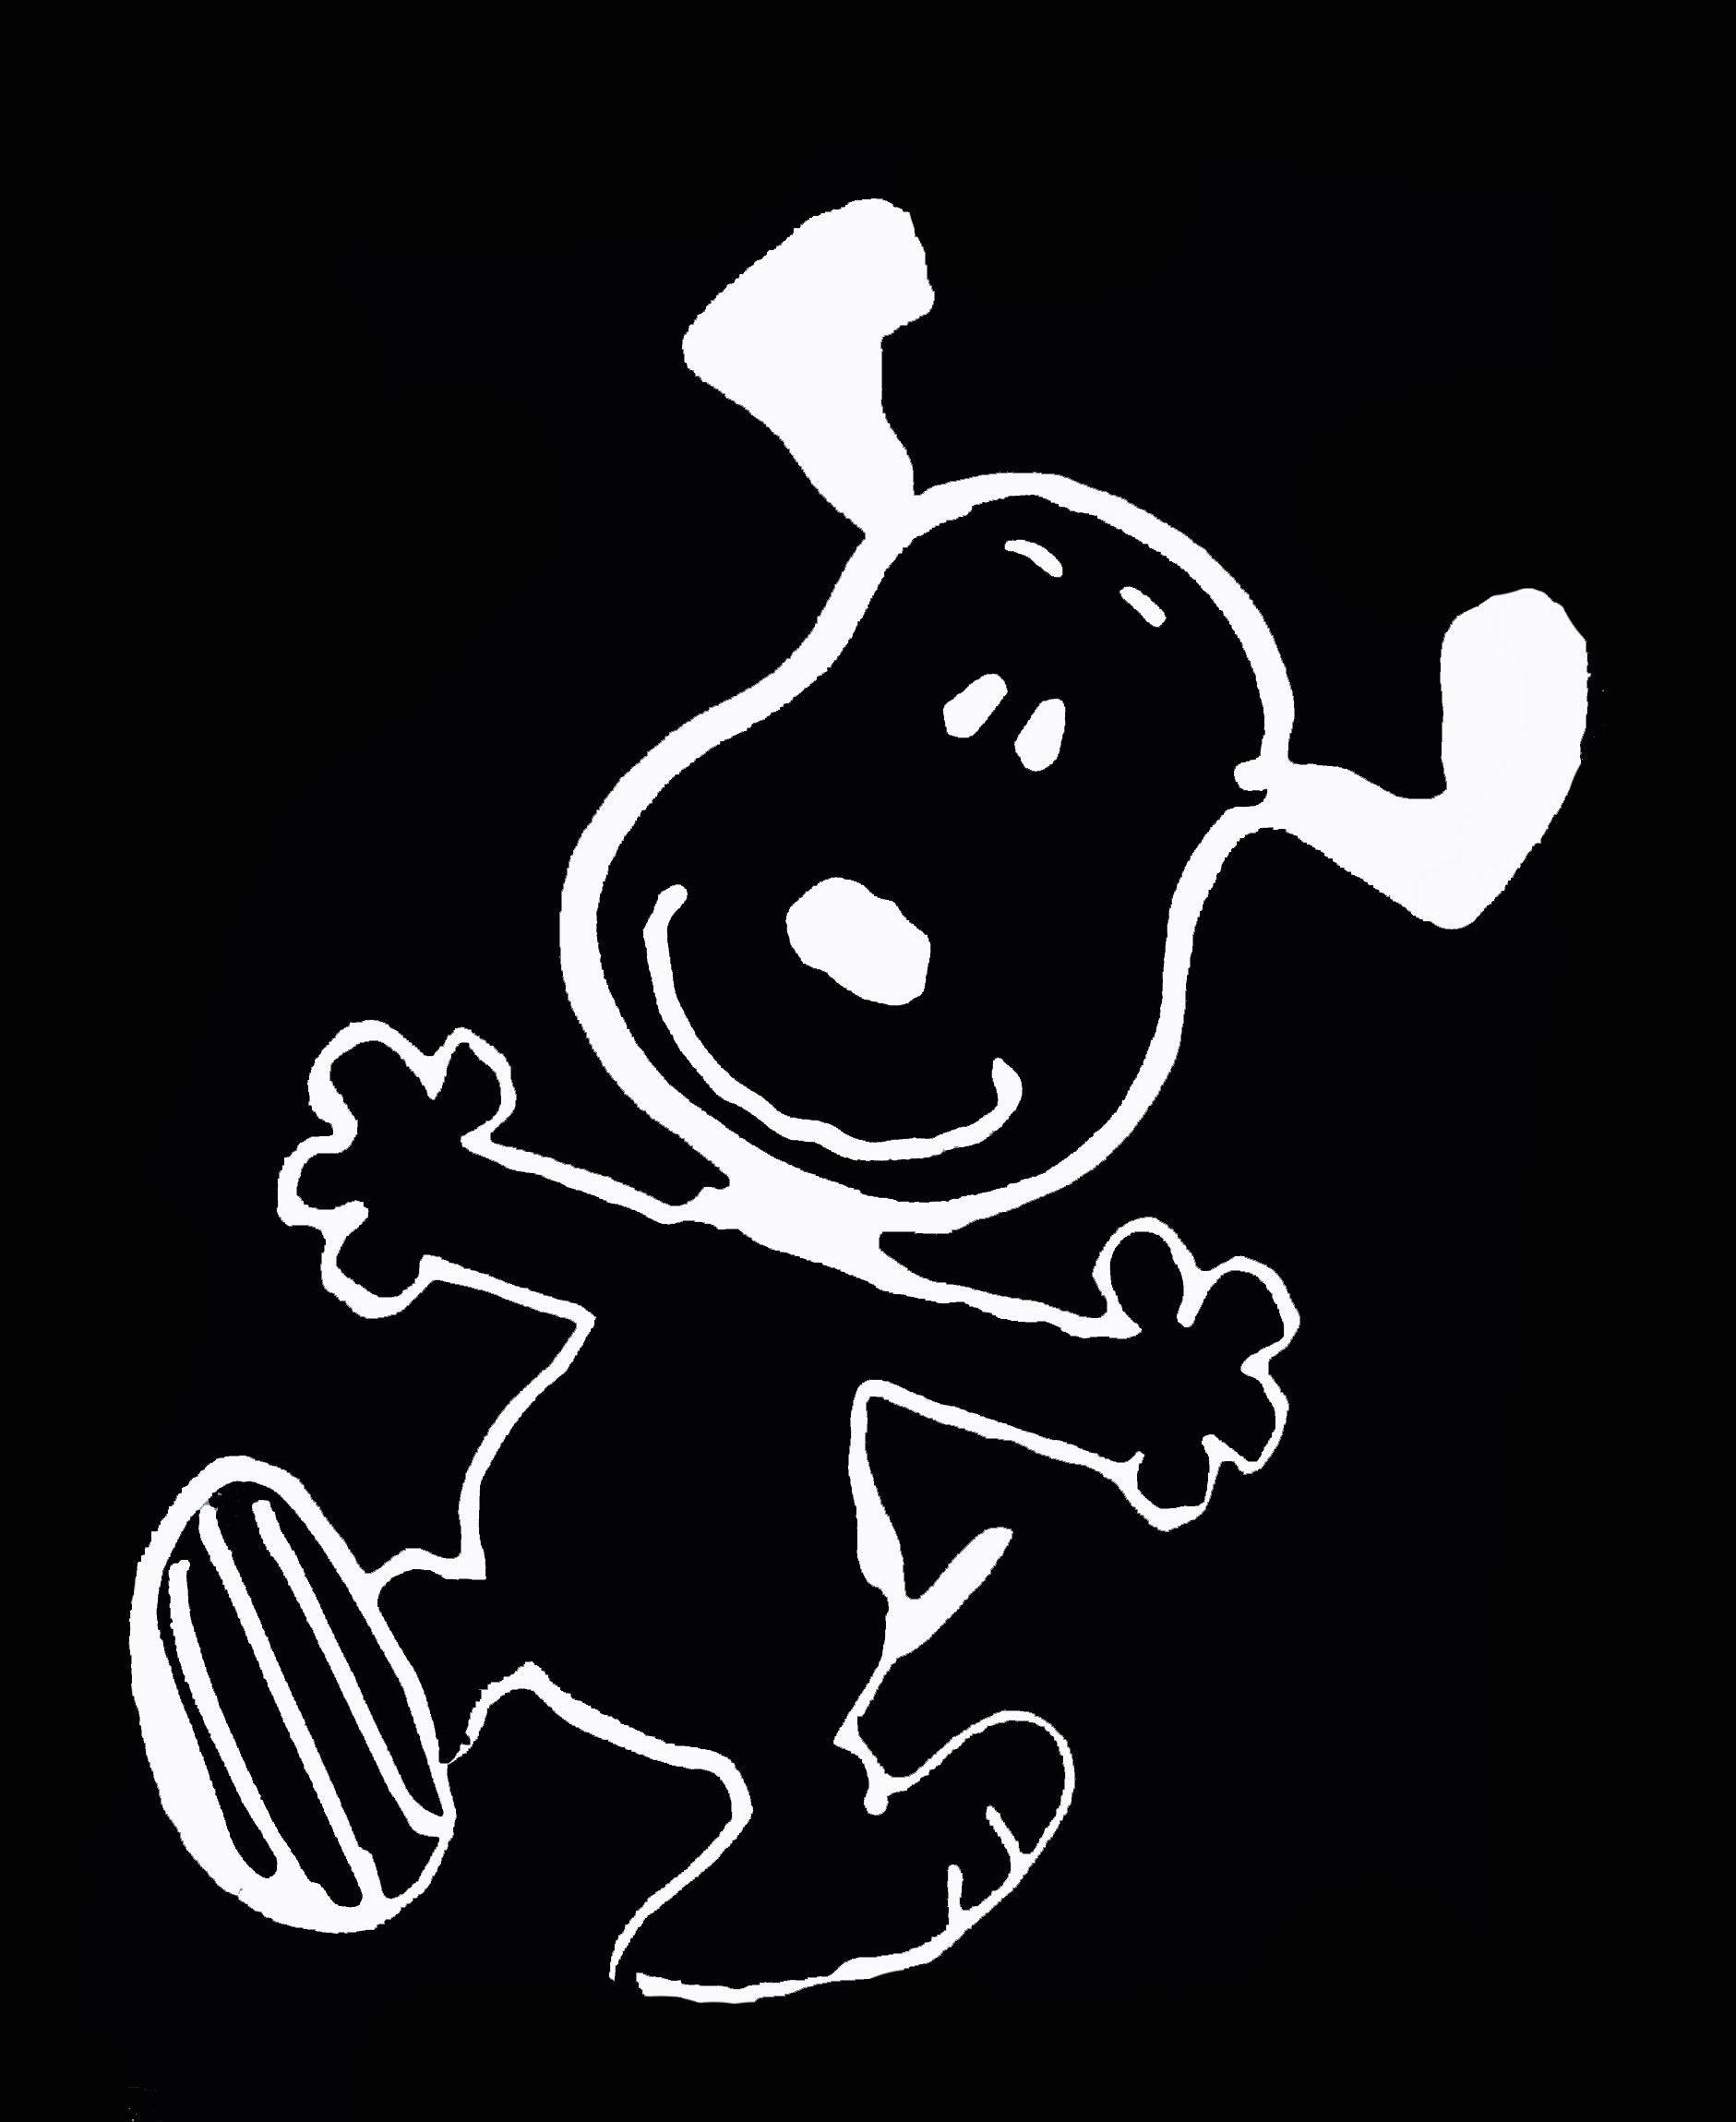 Silly Snoopy Die-Cut Vinyl Decal - White (Image To Follow